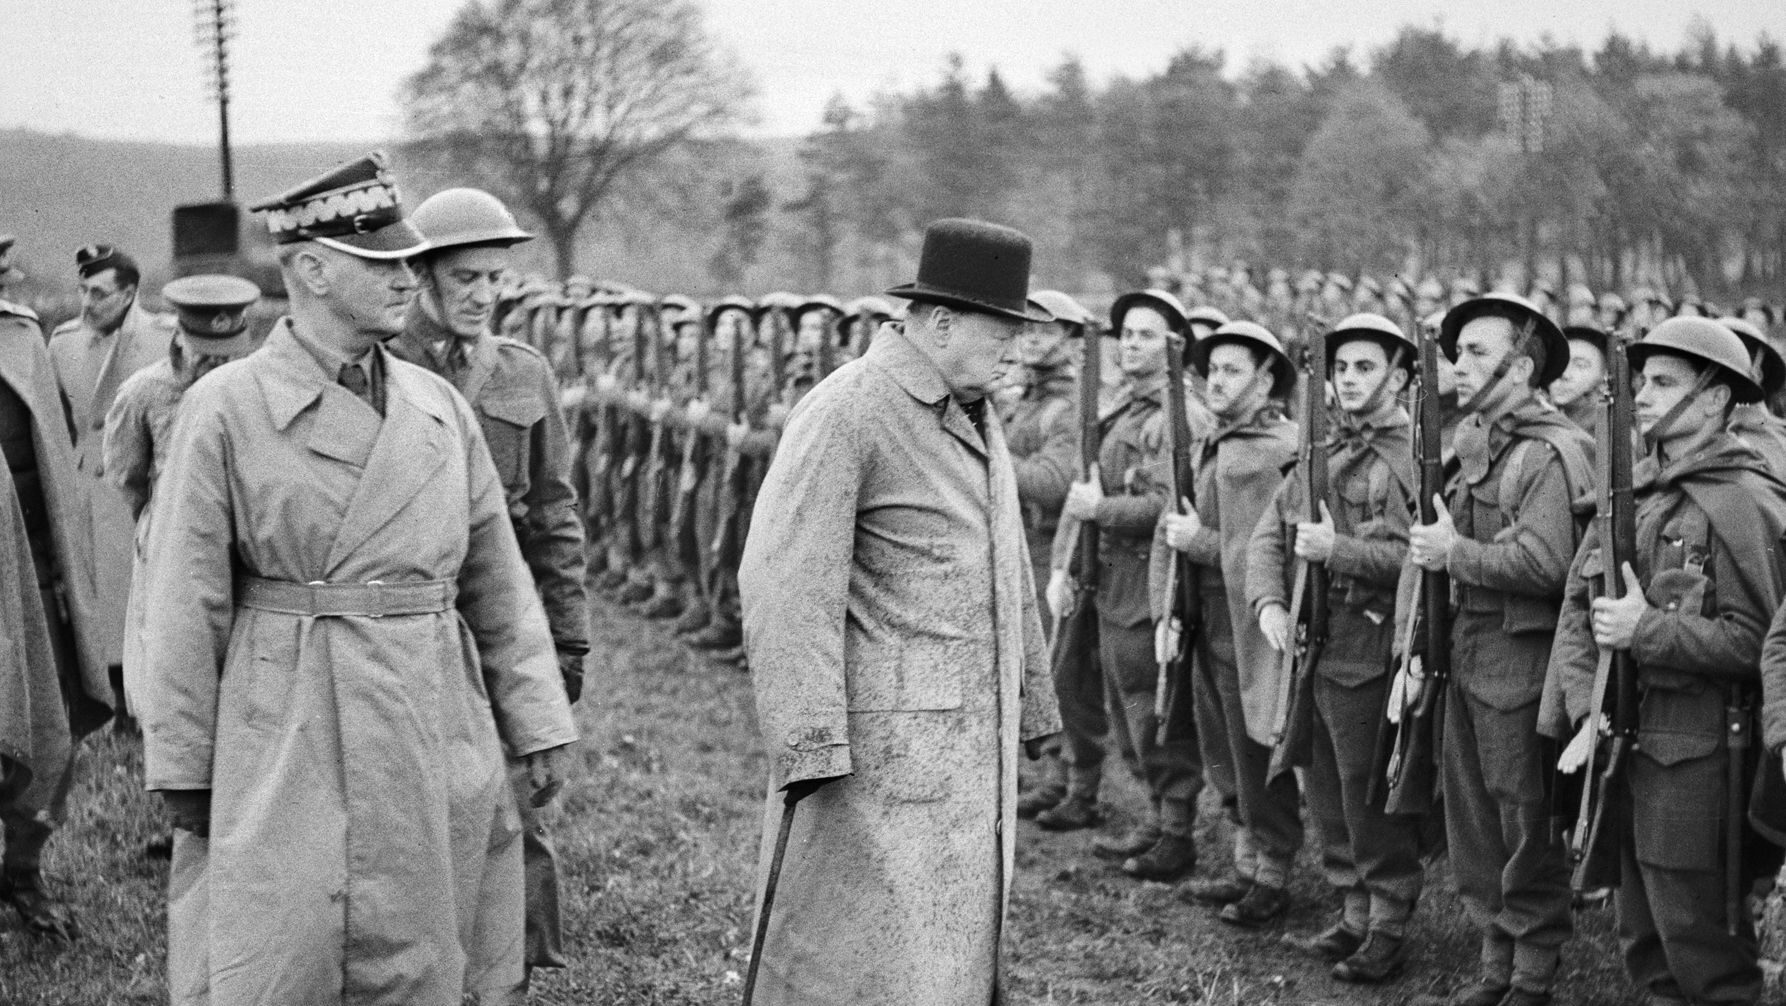 British Prime Minister Winston Churchill inspects Polish troops at Tentsmuir, Scotland, in October 1940. To Churchill’s right is Polish leader in exile Wladyslaw Sikorski.